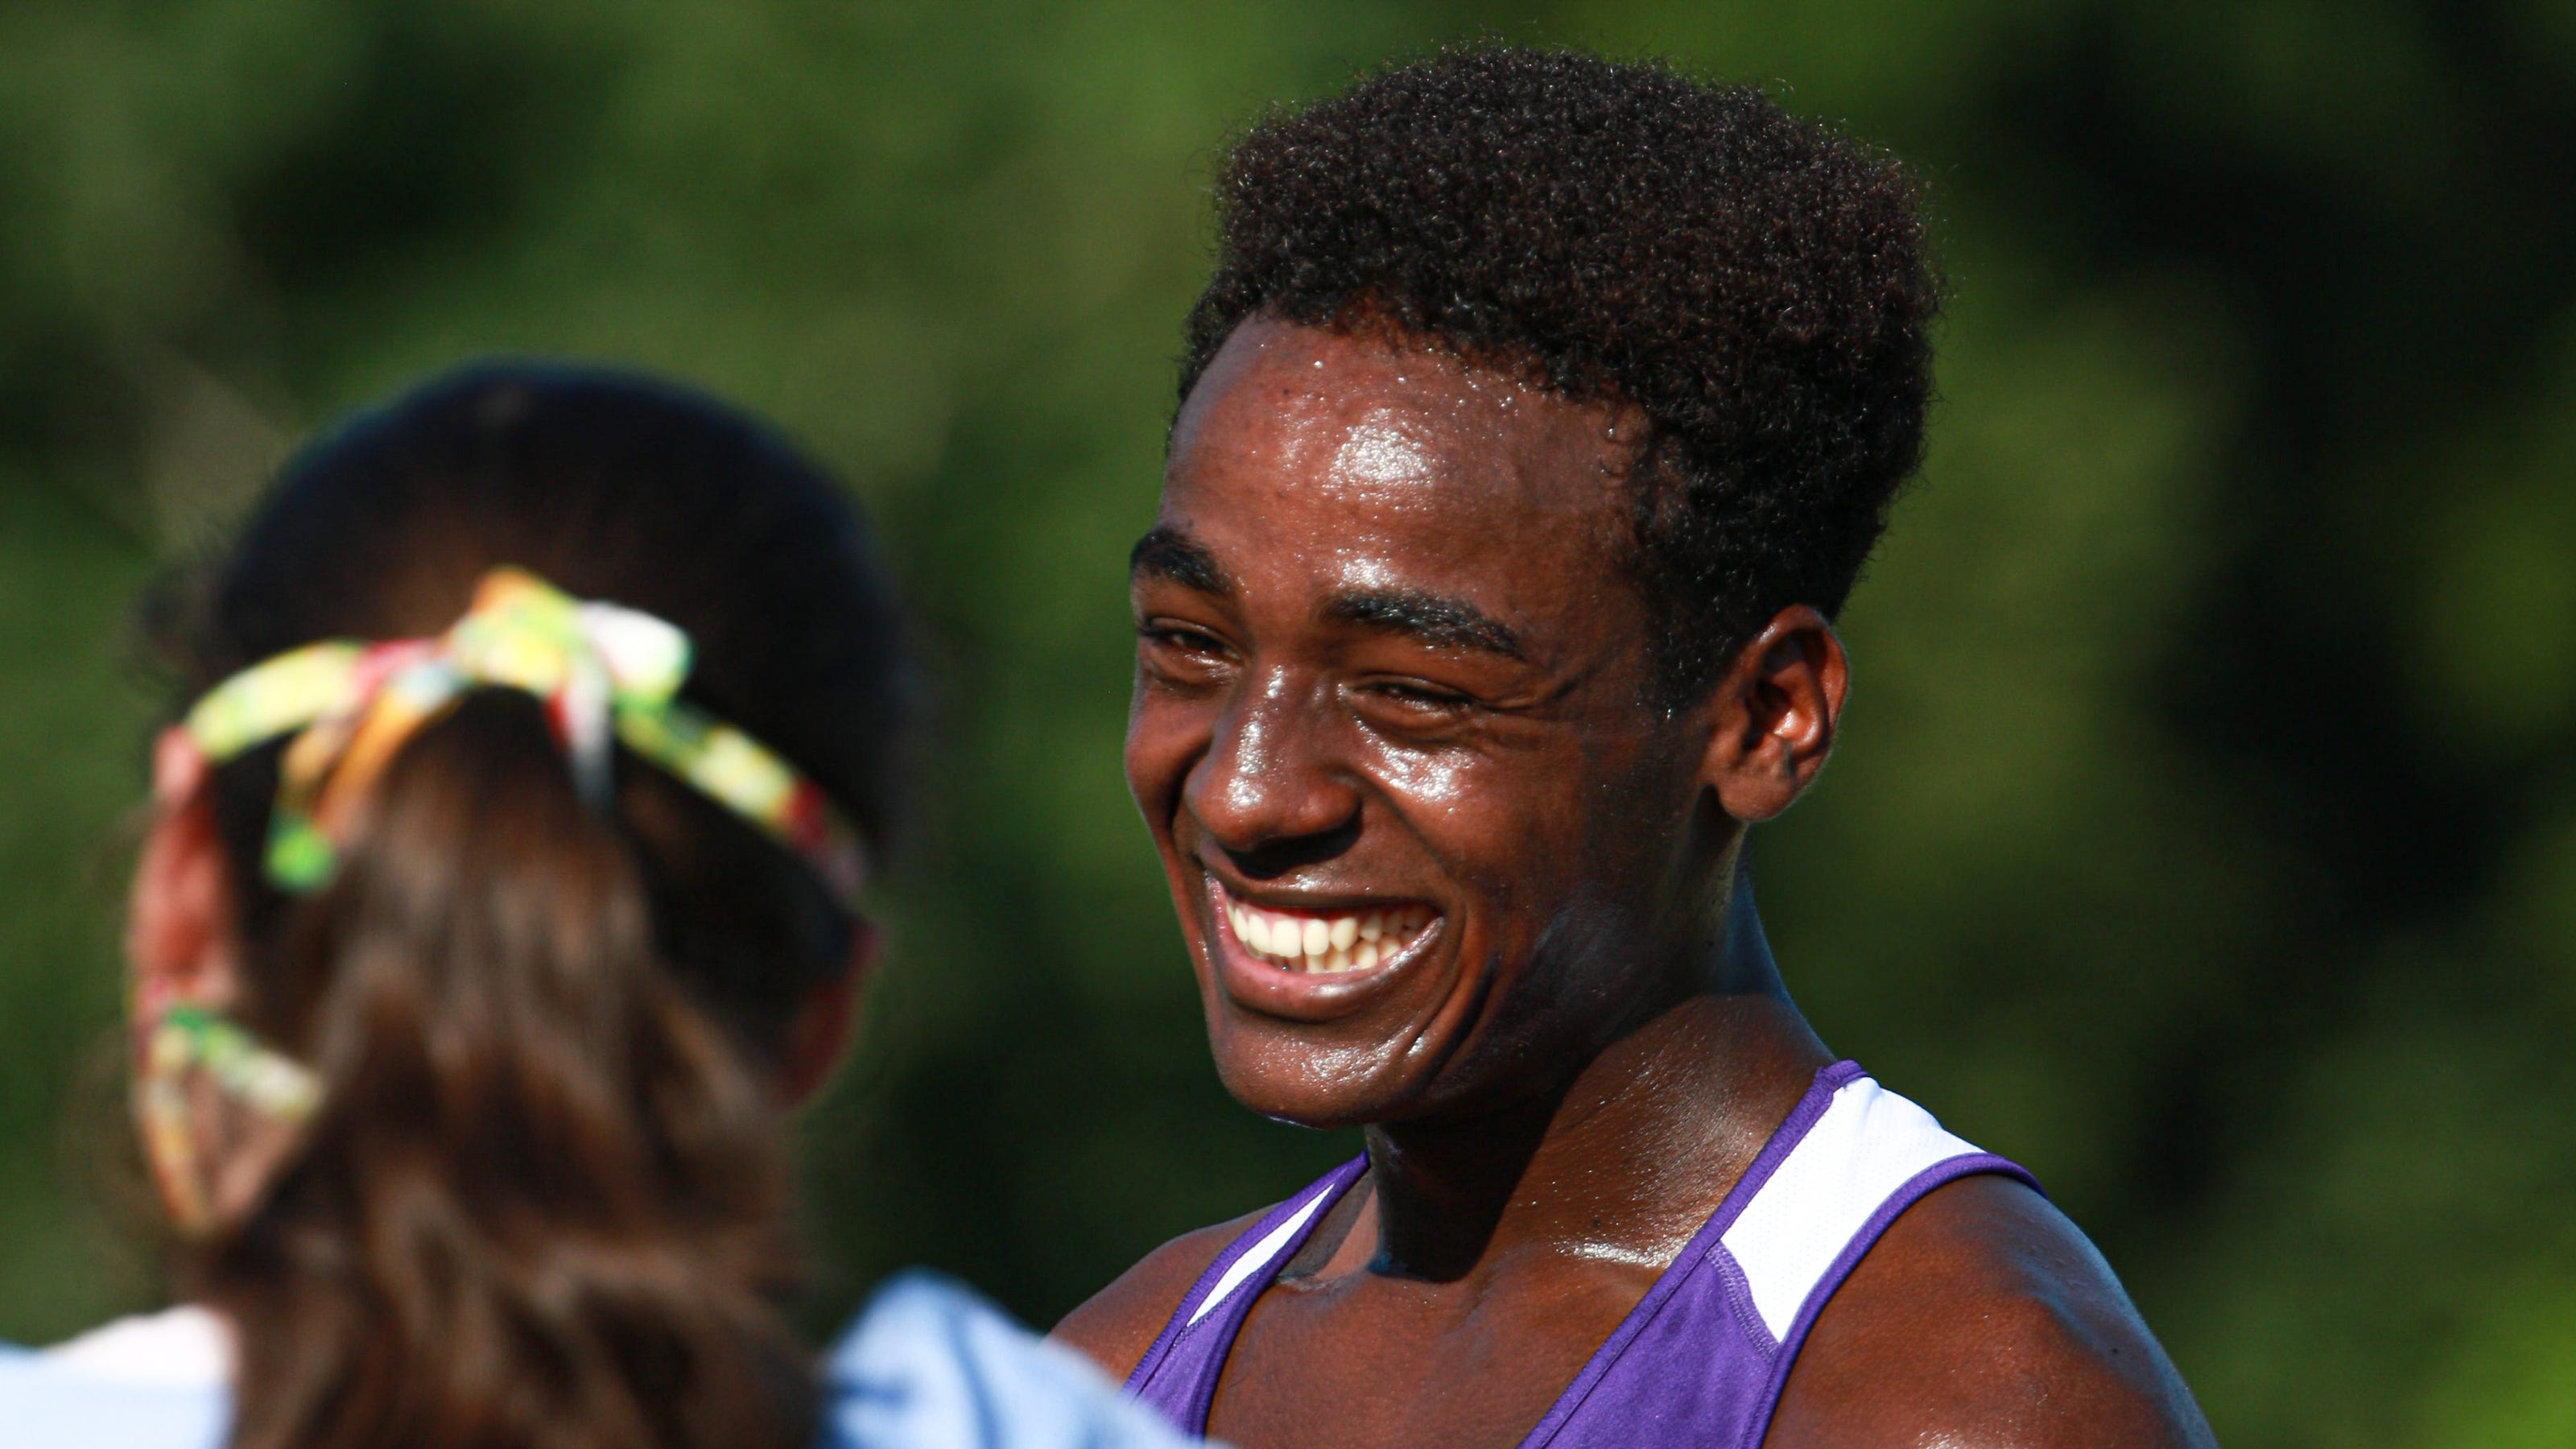 How an orphaned Ethiopian shepherd became one of Indiana's top distance runners